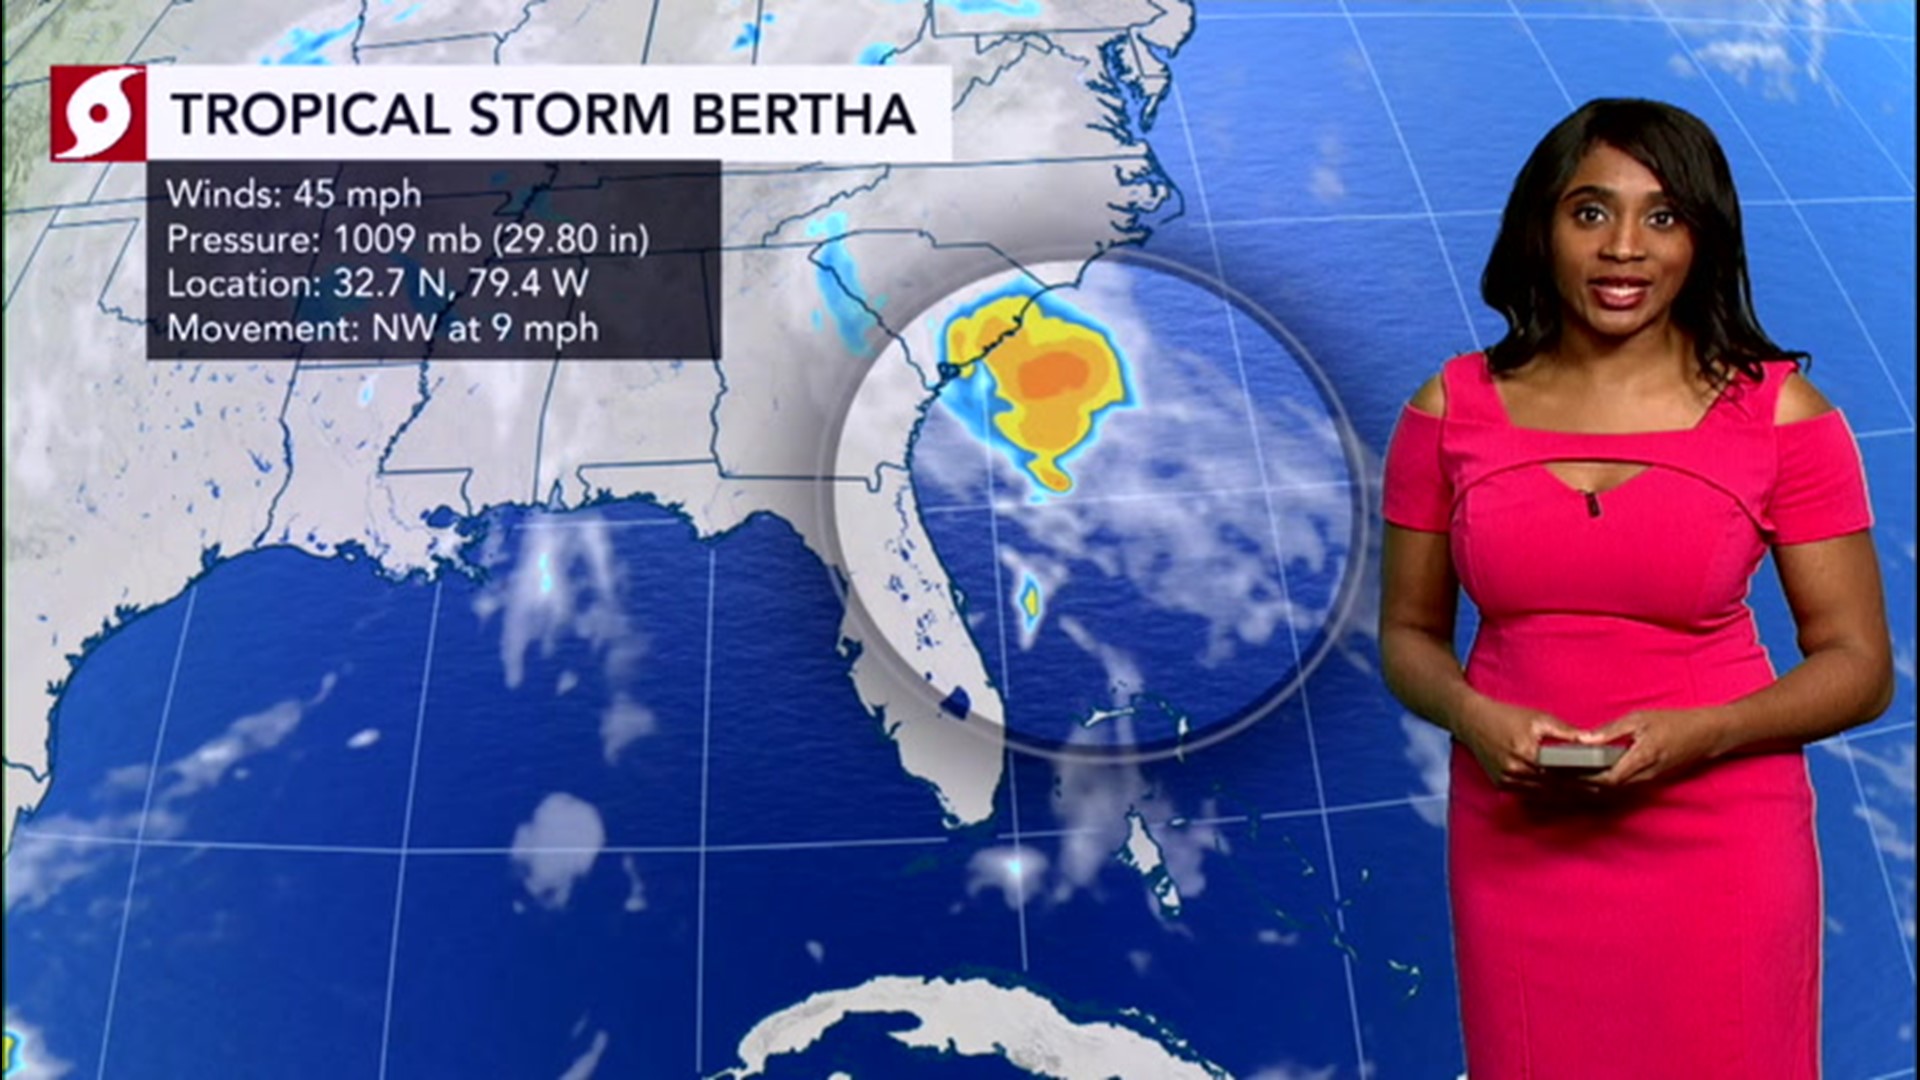 Bertha became the second named system of the 2020 Atlantic season on Wednesday.